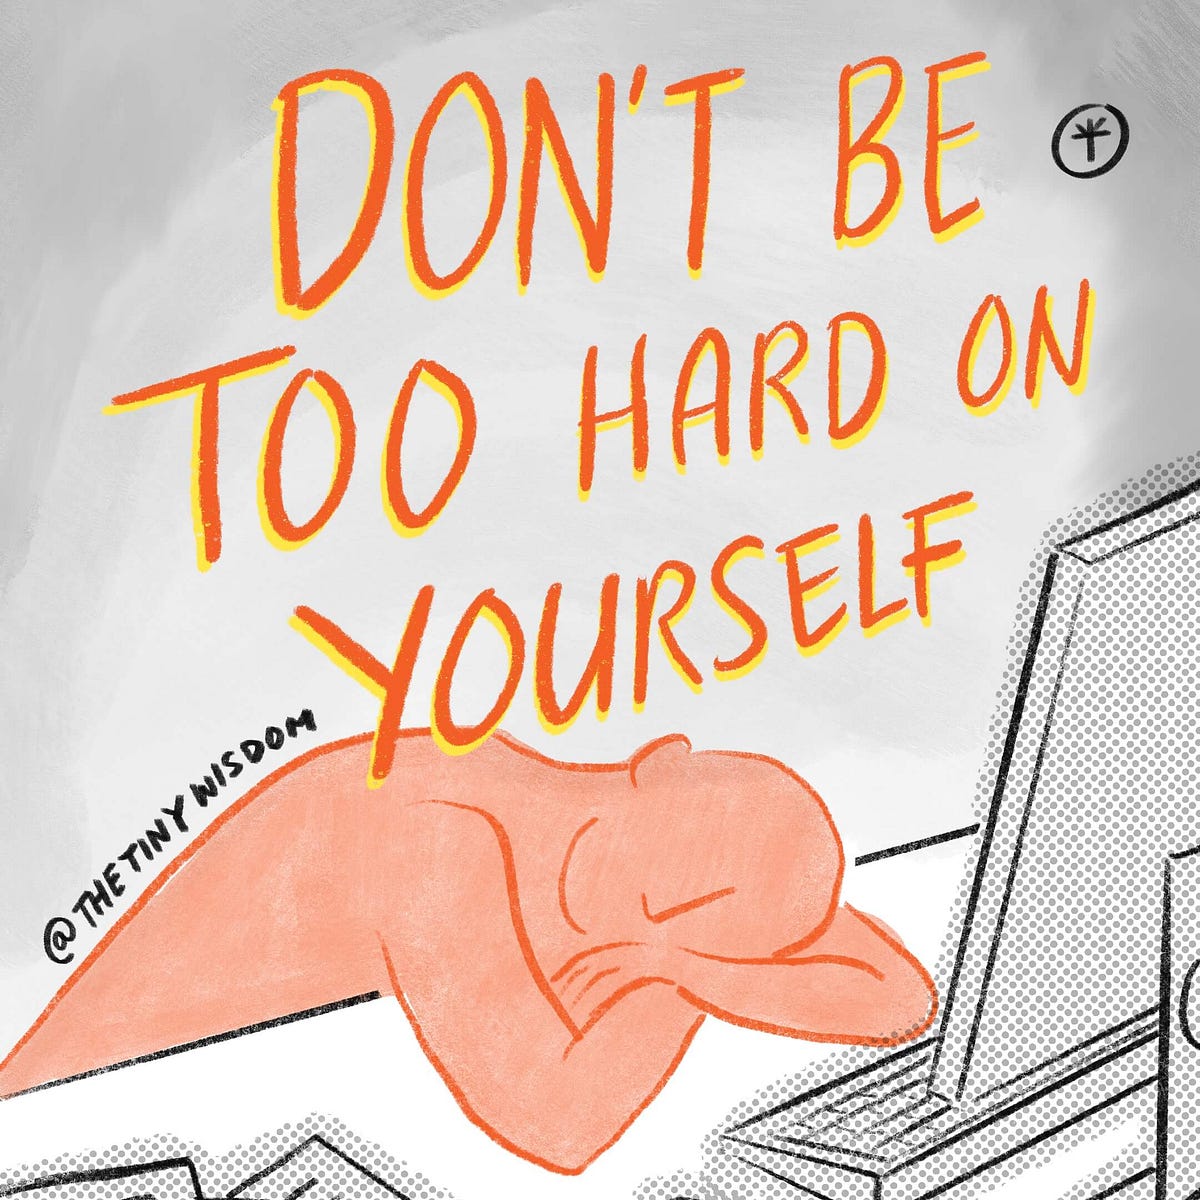 Don't Be Too Hard on Yourself. Slowing down is also part of the